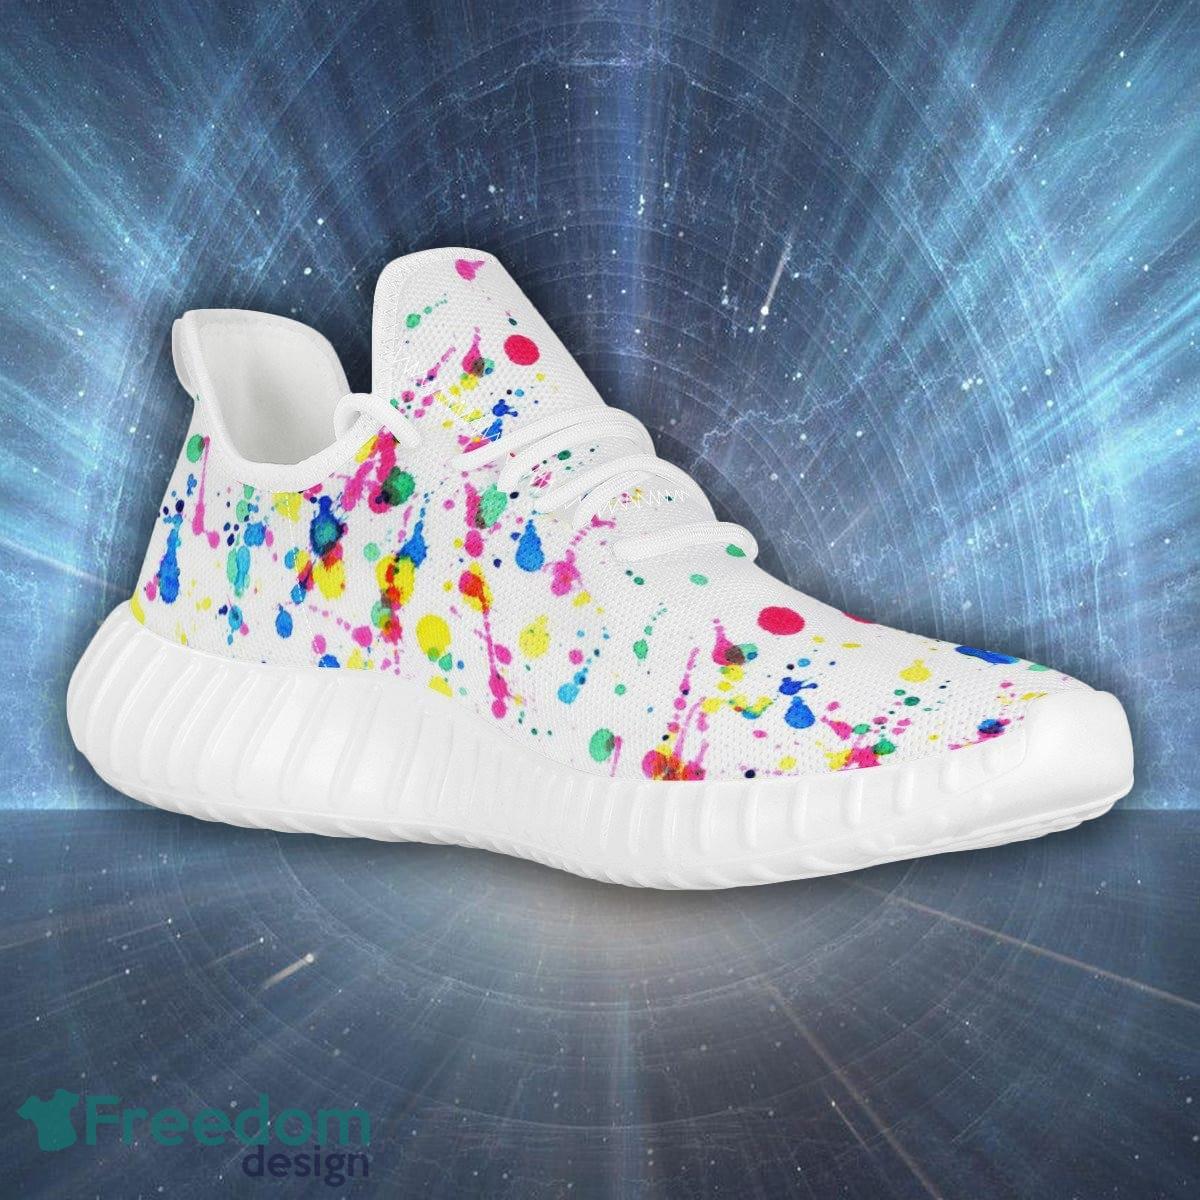 Paint Multi Colored Splattered Yeezy's